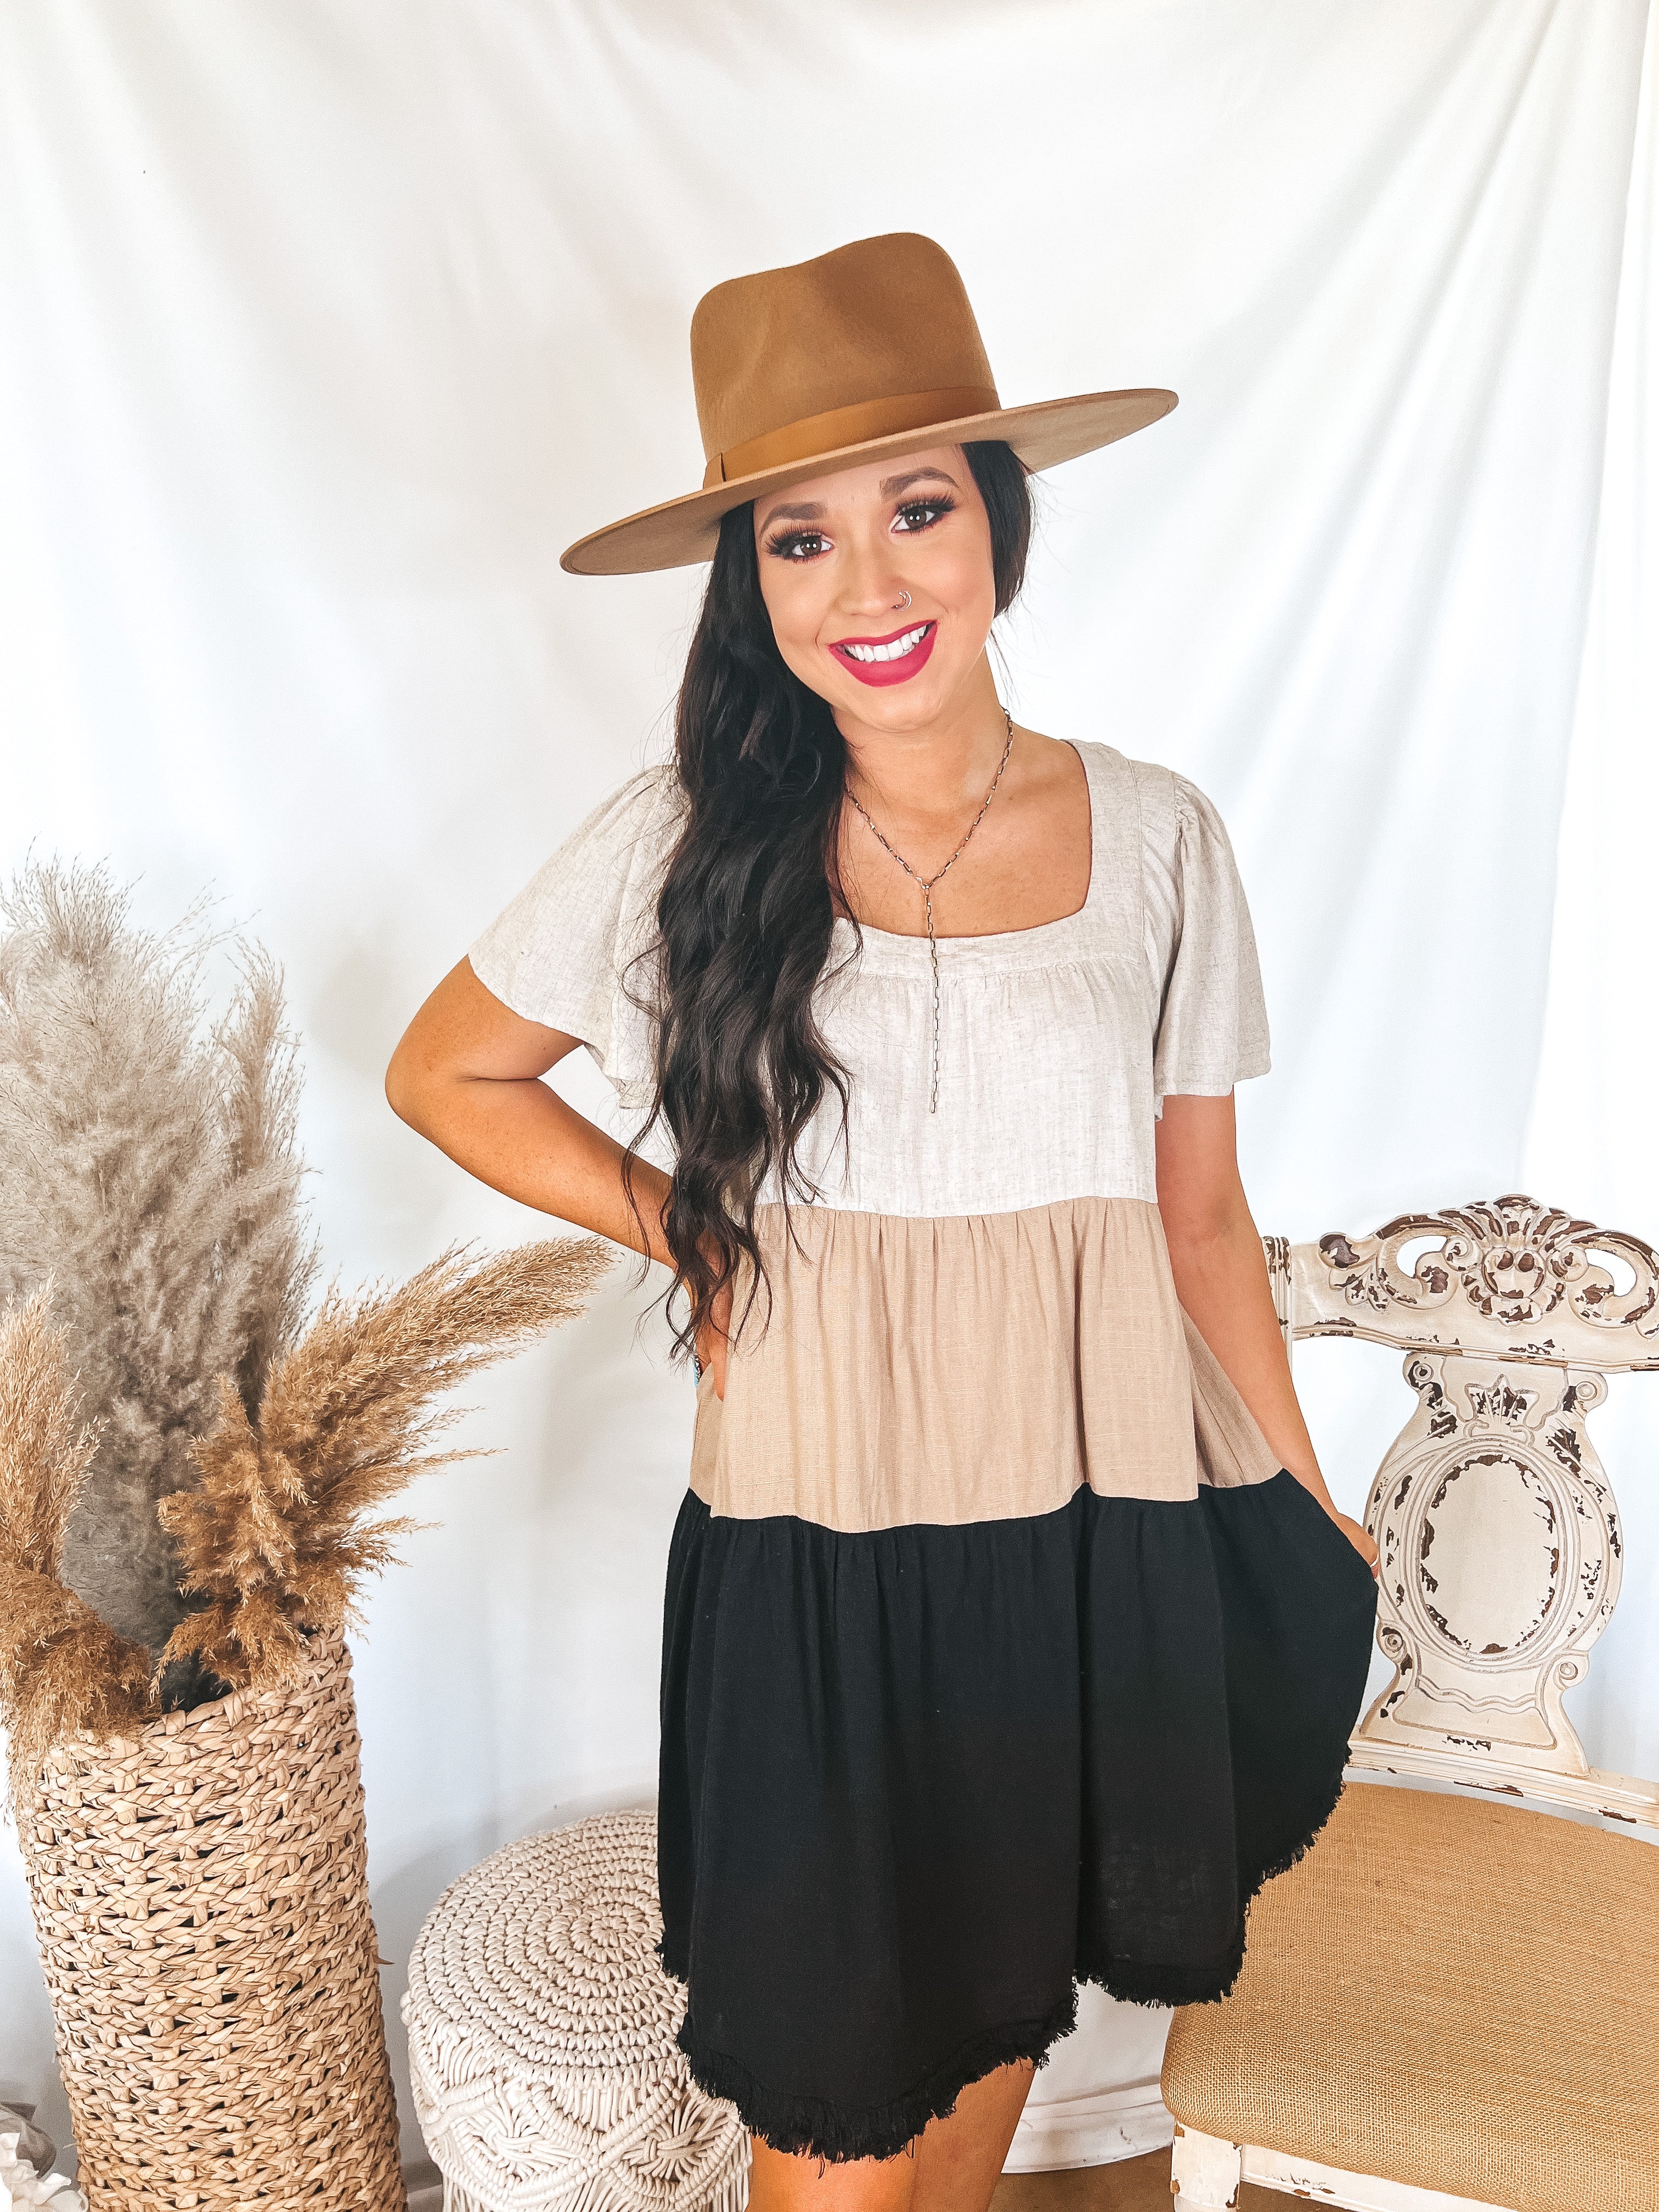 Promised Love Square Neck Color Block Dress in Brown and Black - Giddy Up Glamour Boutique